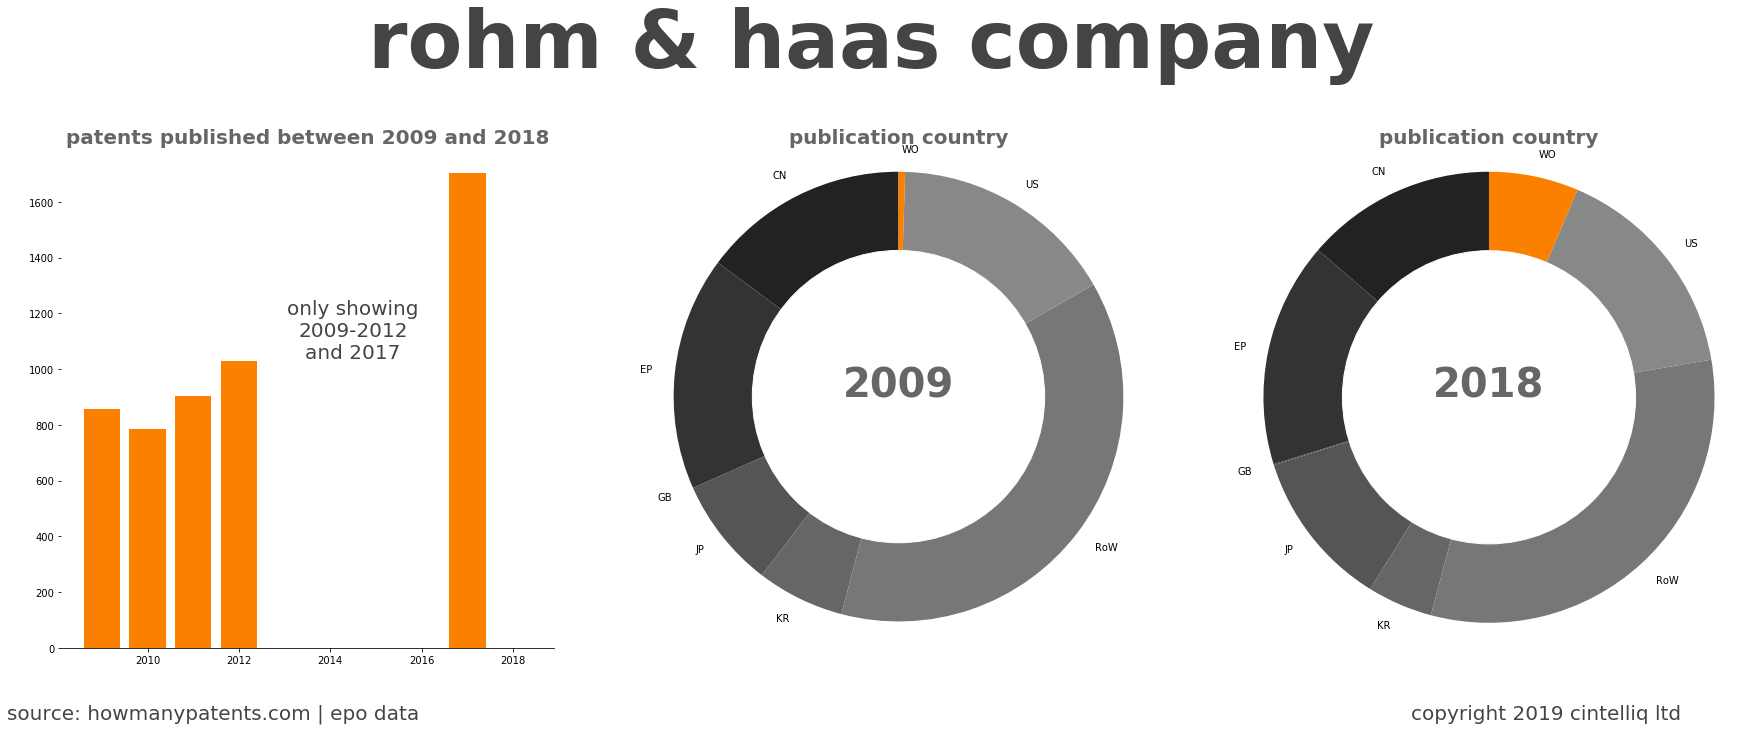 summary of patents for Rohm & Haas Company